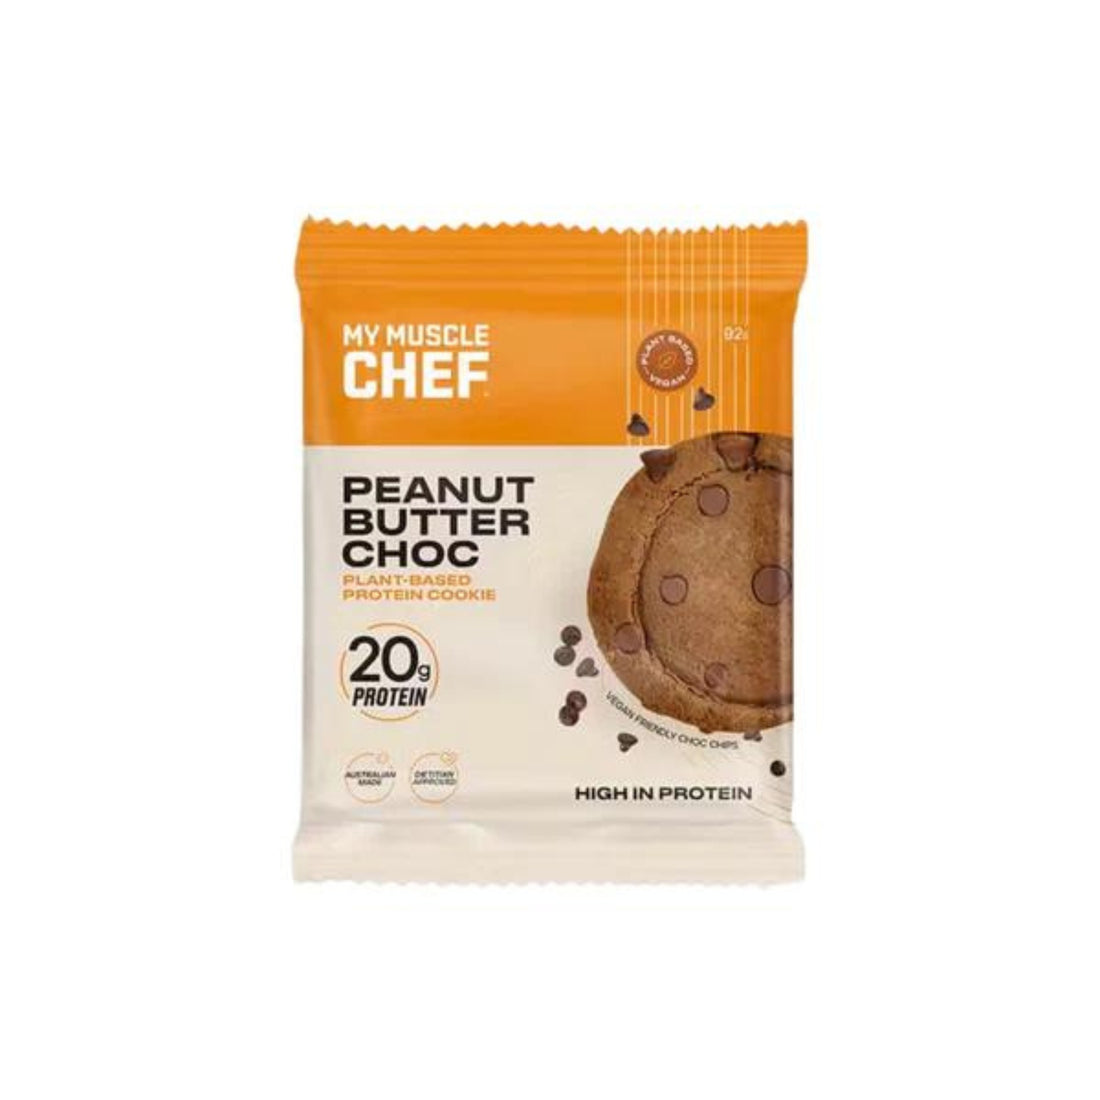 My Muscle Chef Cookie - Peanut Butter Choc